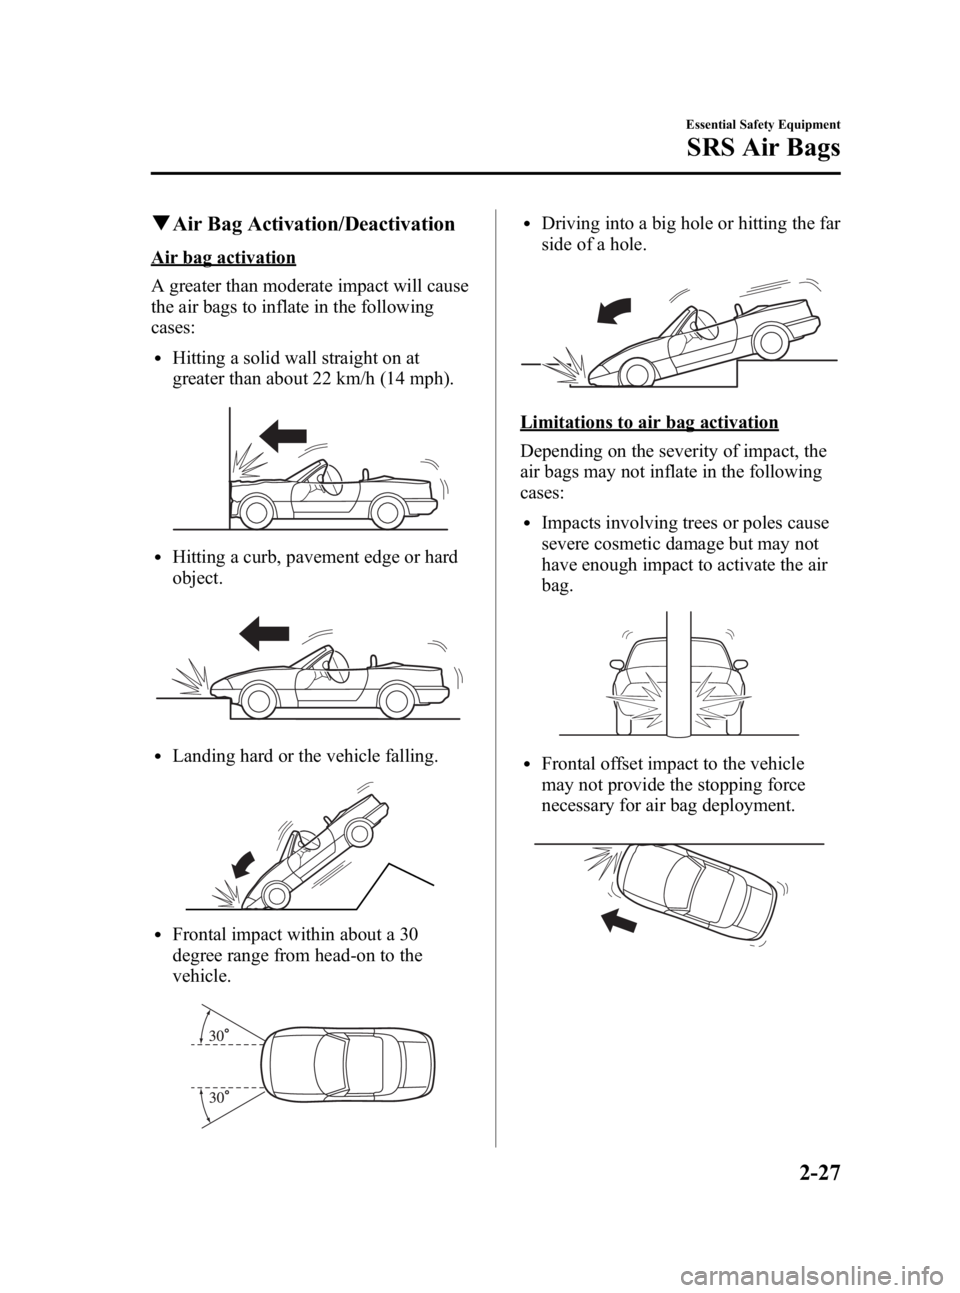 MAZDA MODEL MX-5 MIATA 2005 Owners Guide Black plate (39,1)
qAir Bag Activation/Deactivation
Air bag activation
A greater than moderate impact will cause
the air bags to inflate in the following
cases:
lHitting a solid wall straight on at
gr